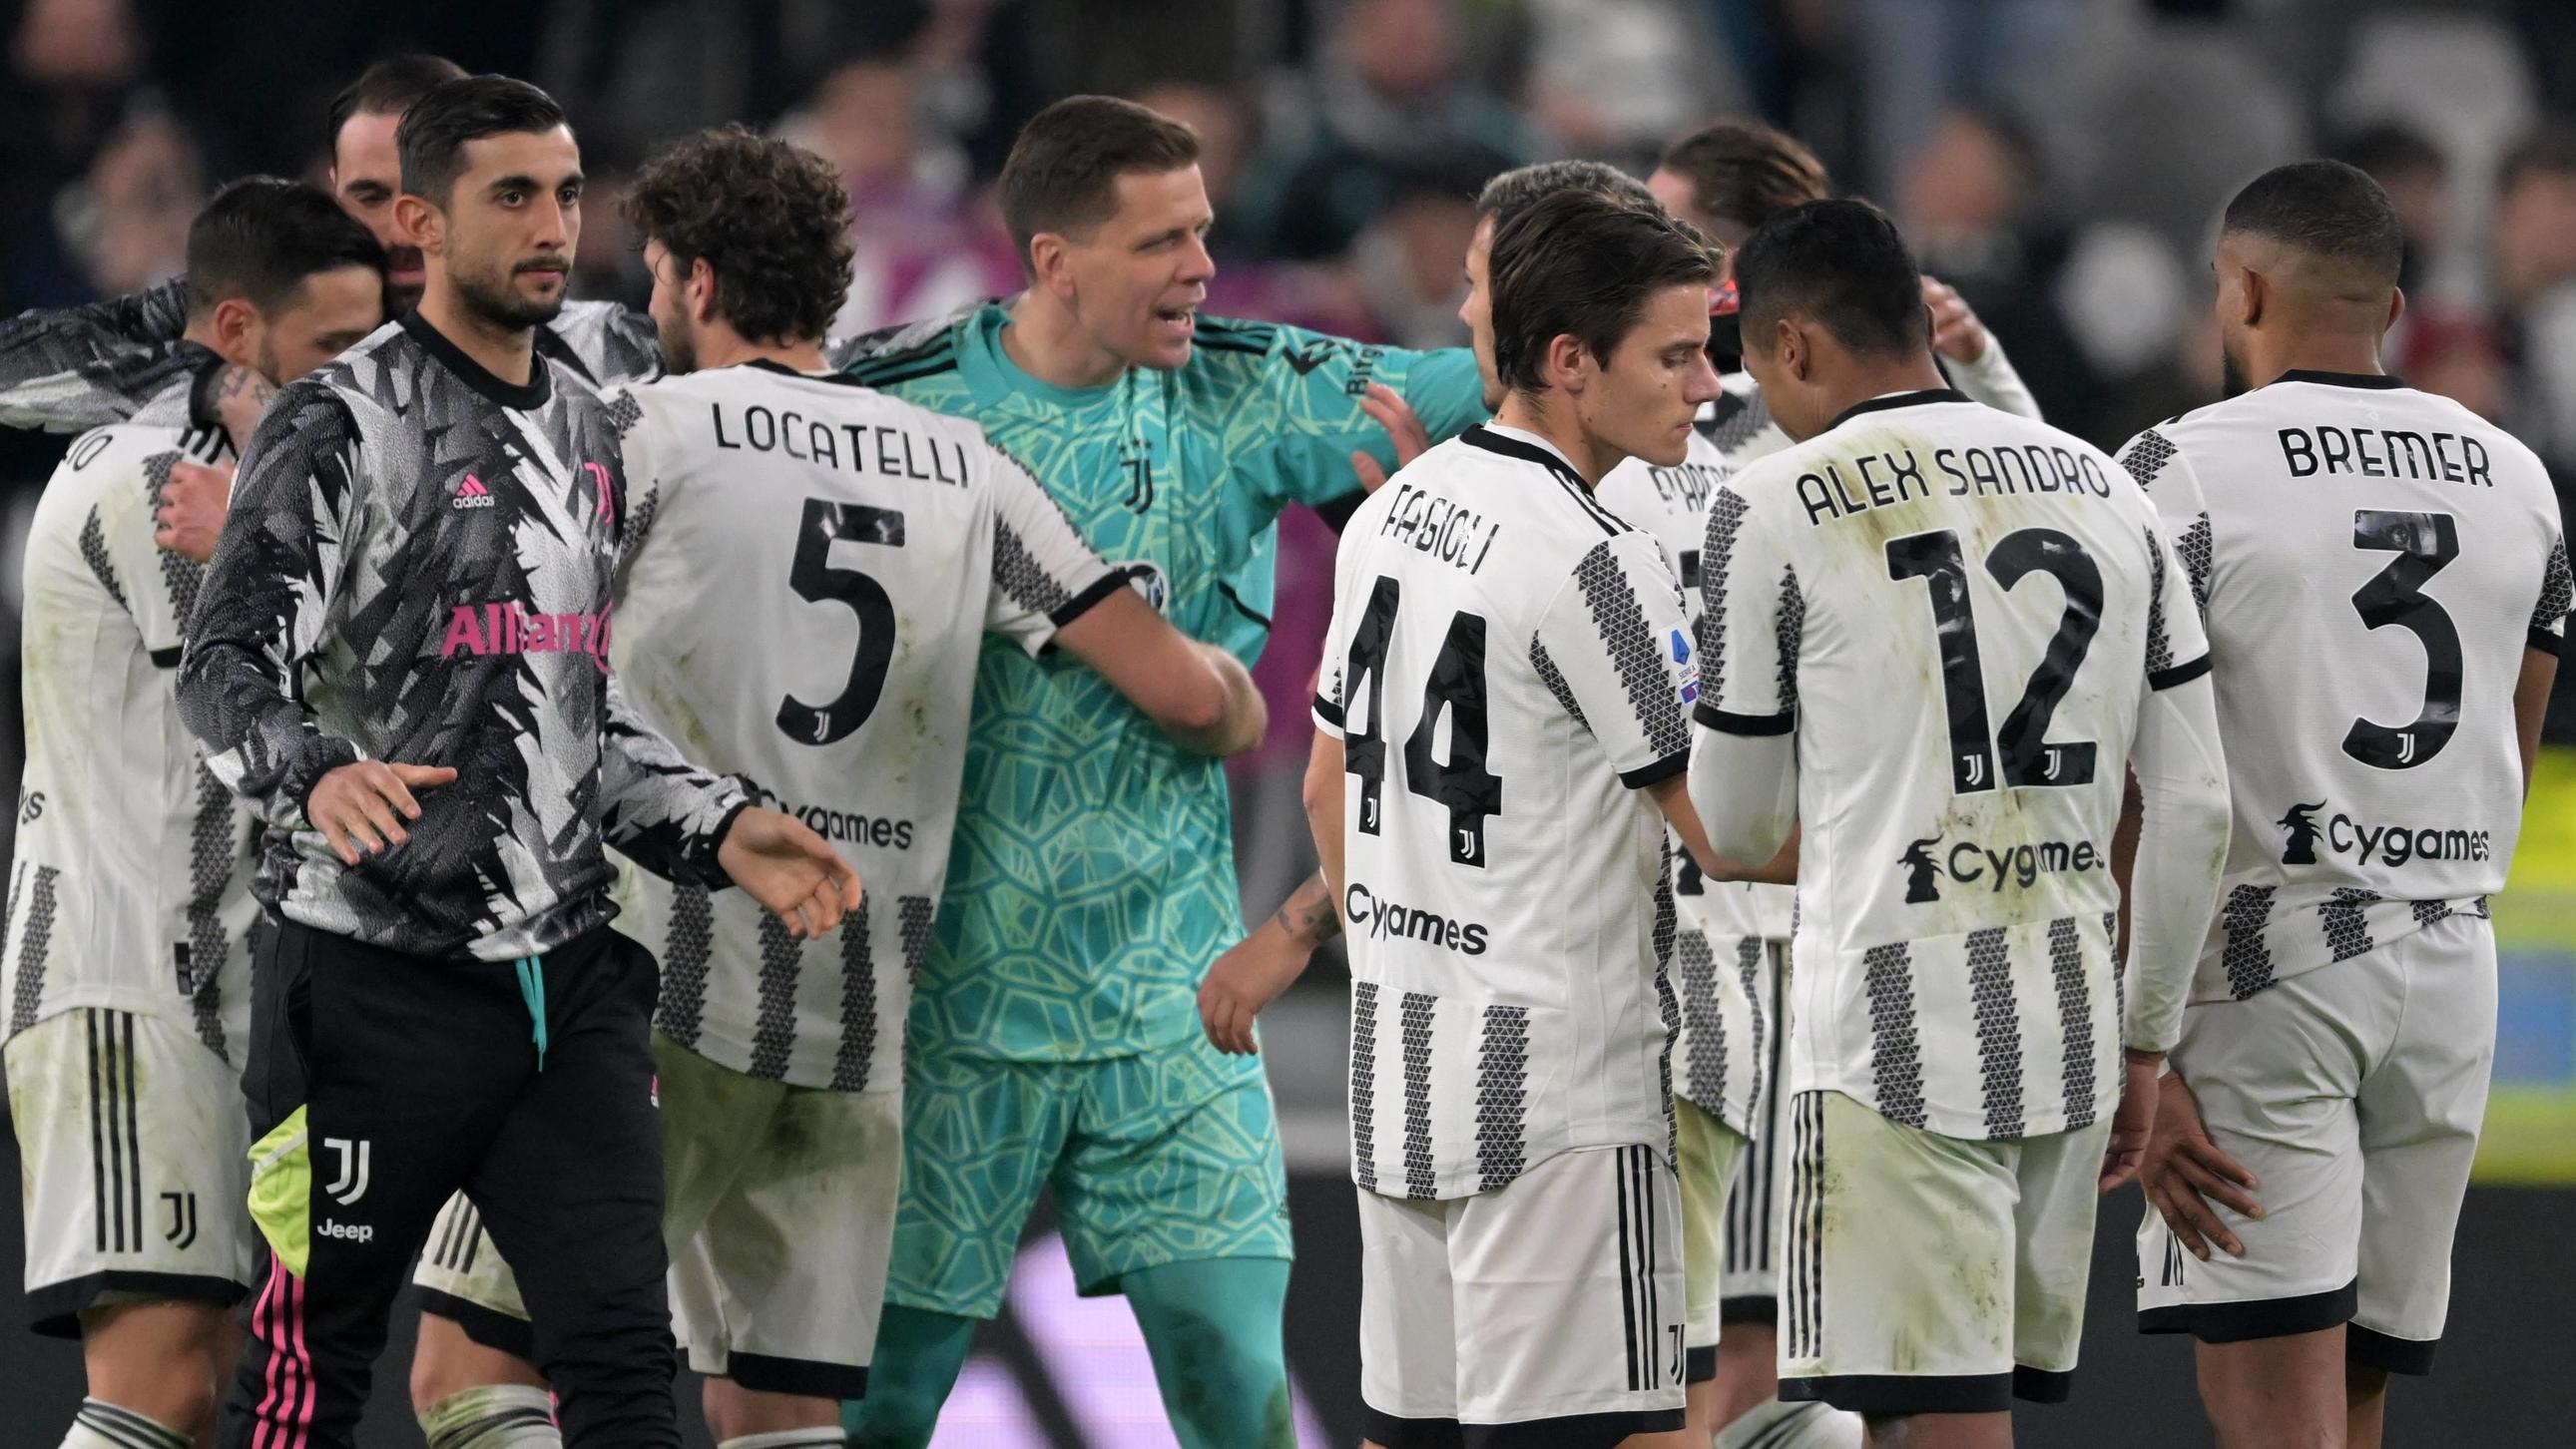 TURIN - Juventus celebrates victory during the Italian Serie A match between Juventus FC and ACF Fiorentina at Allianz Stadium on February 12, 2023 in Turin, Italy. AP Dutch Height GERRIT OF COLOGNE Serie A Italy 2022/2023 xVIxANPxSportx/xGerritxvanx